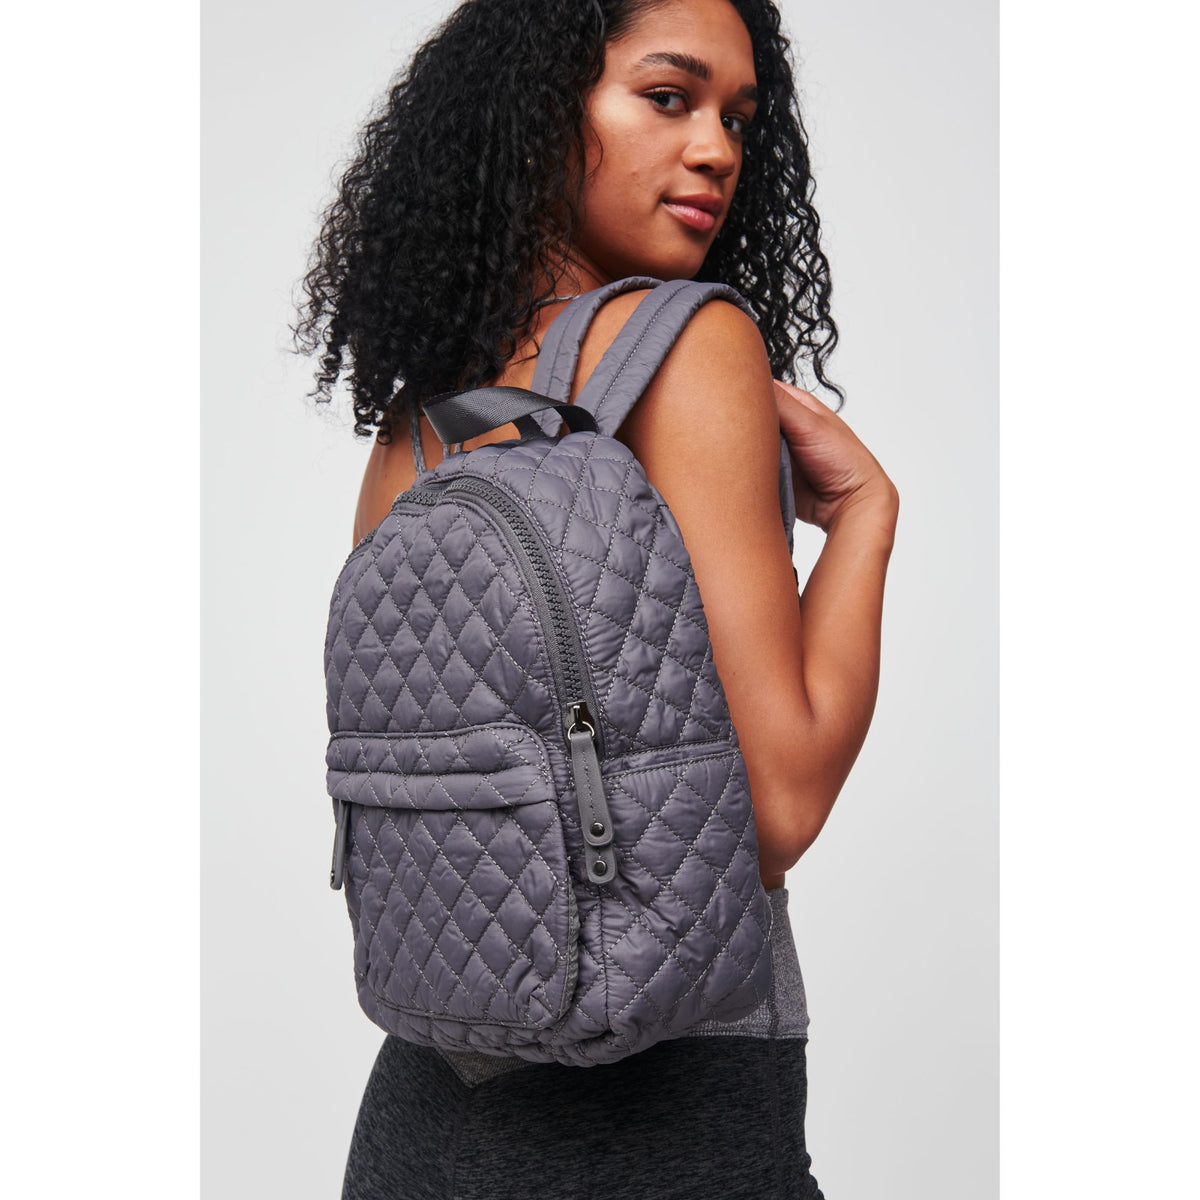 Woman wearing Carbon Urban Expressions Swish Backpack 840611175748 View 2 | Carbon